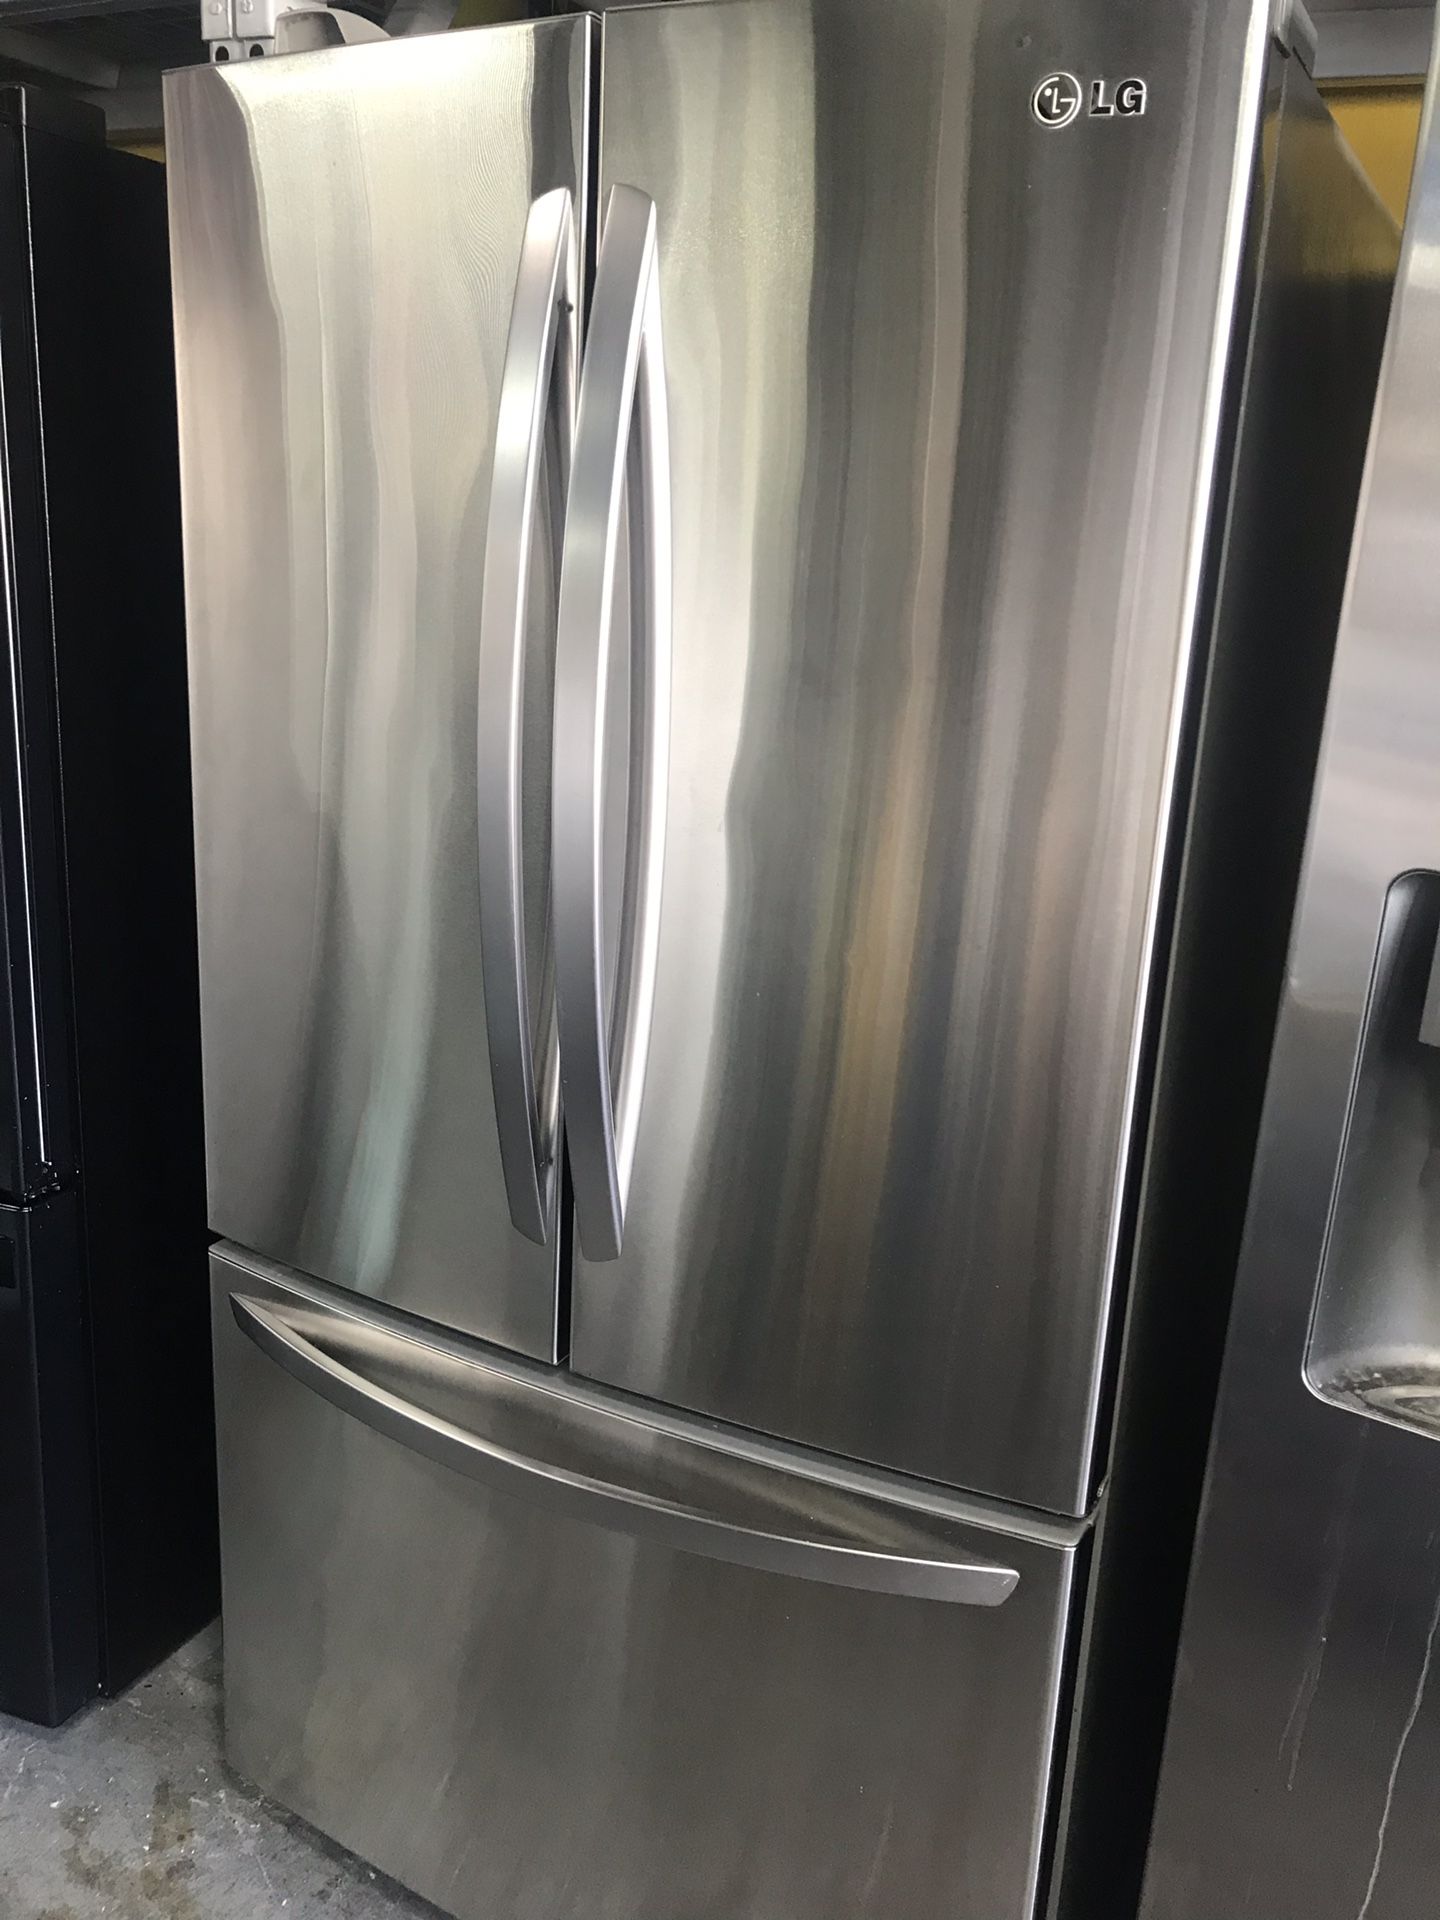 LG French door refrigerator with ice maker